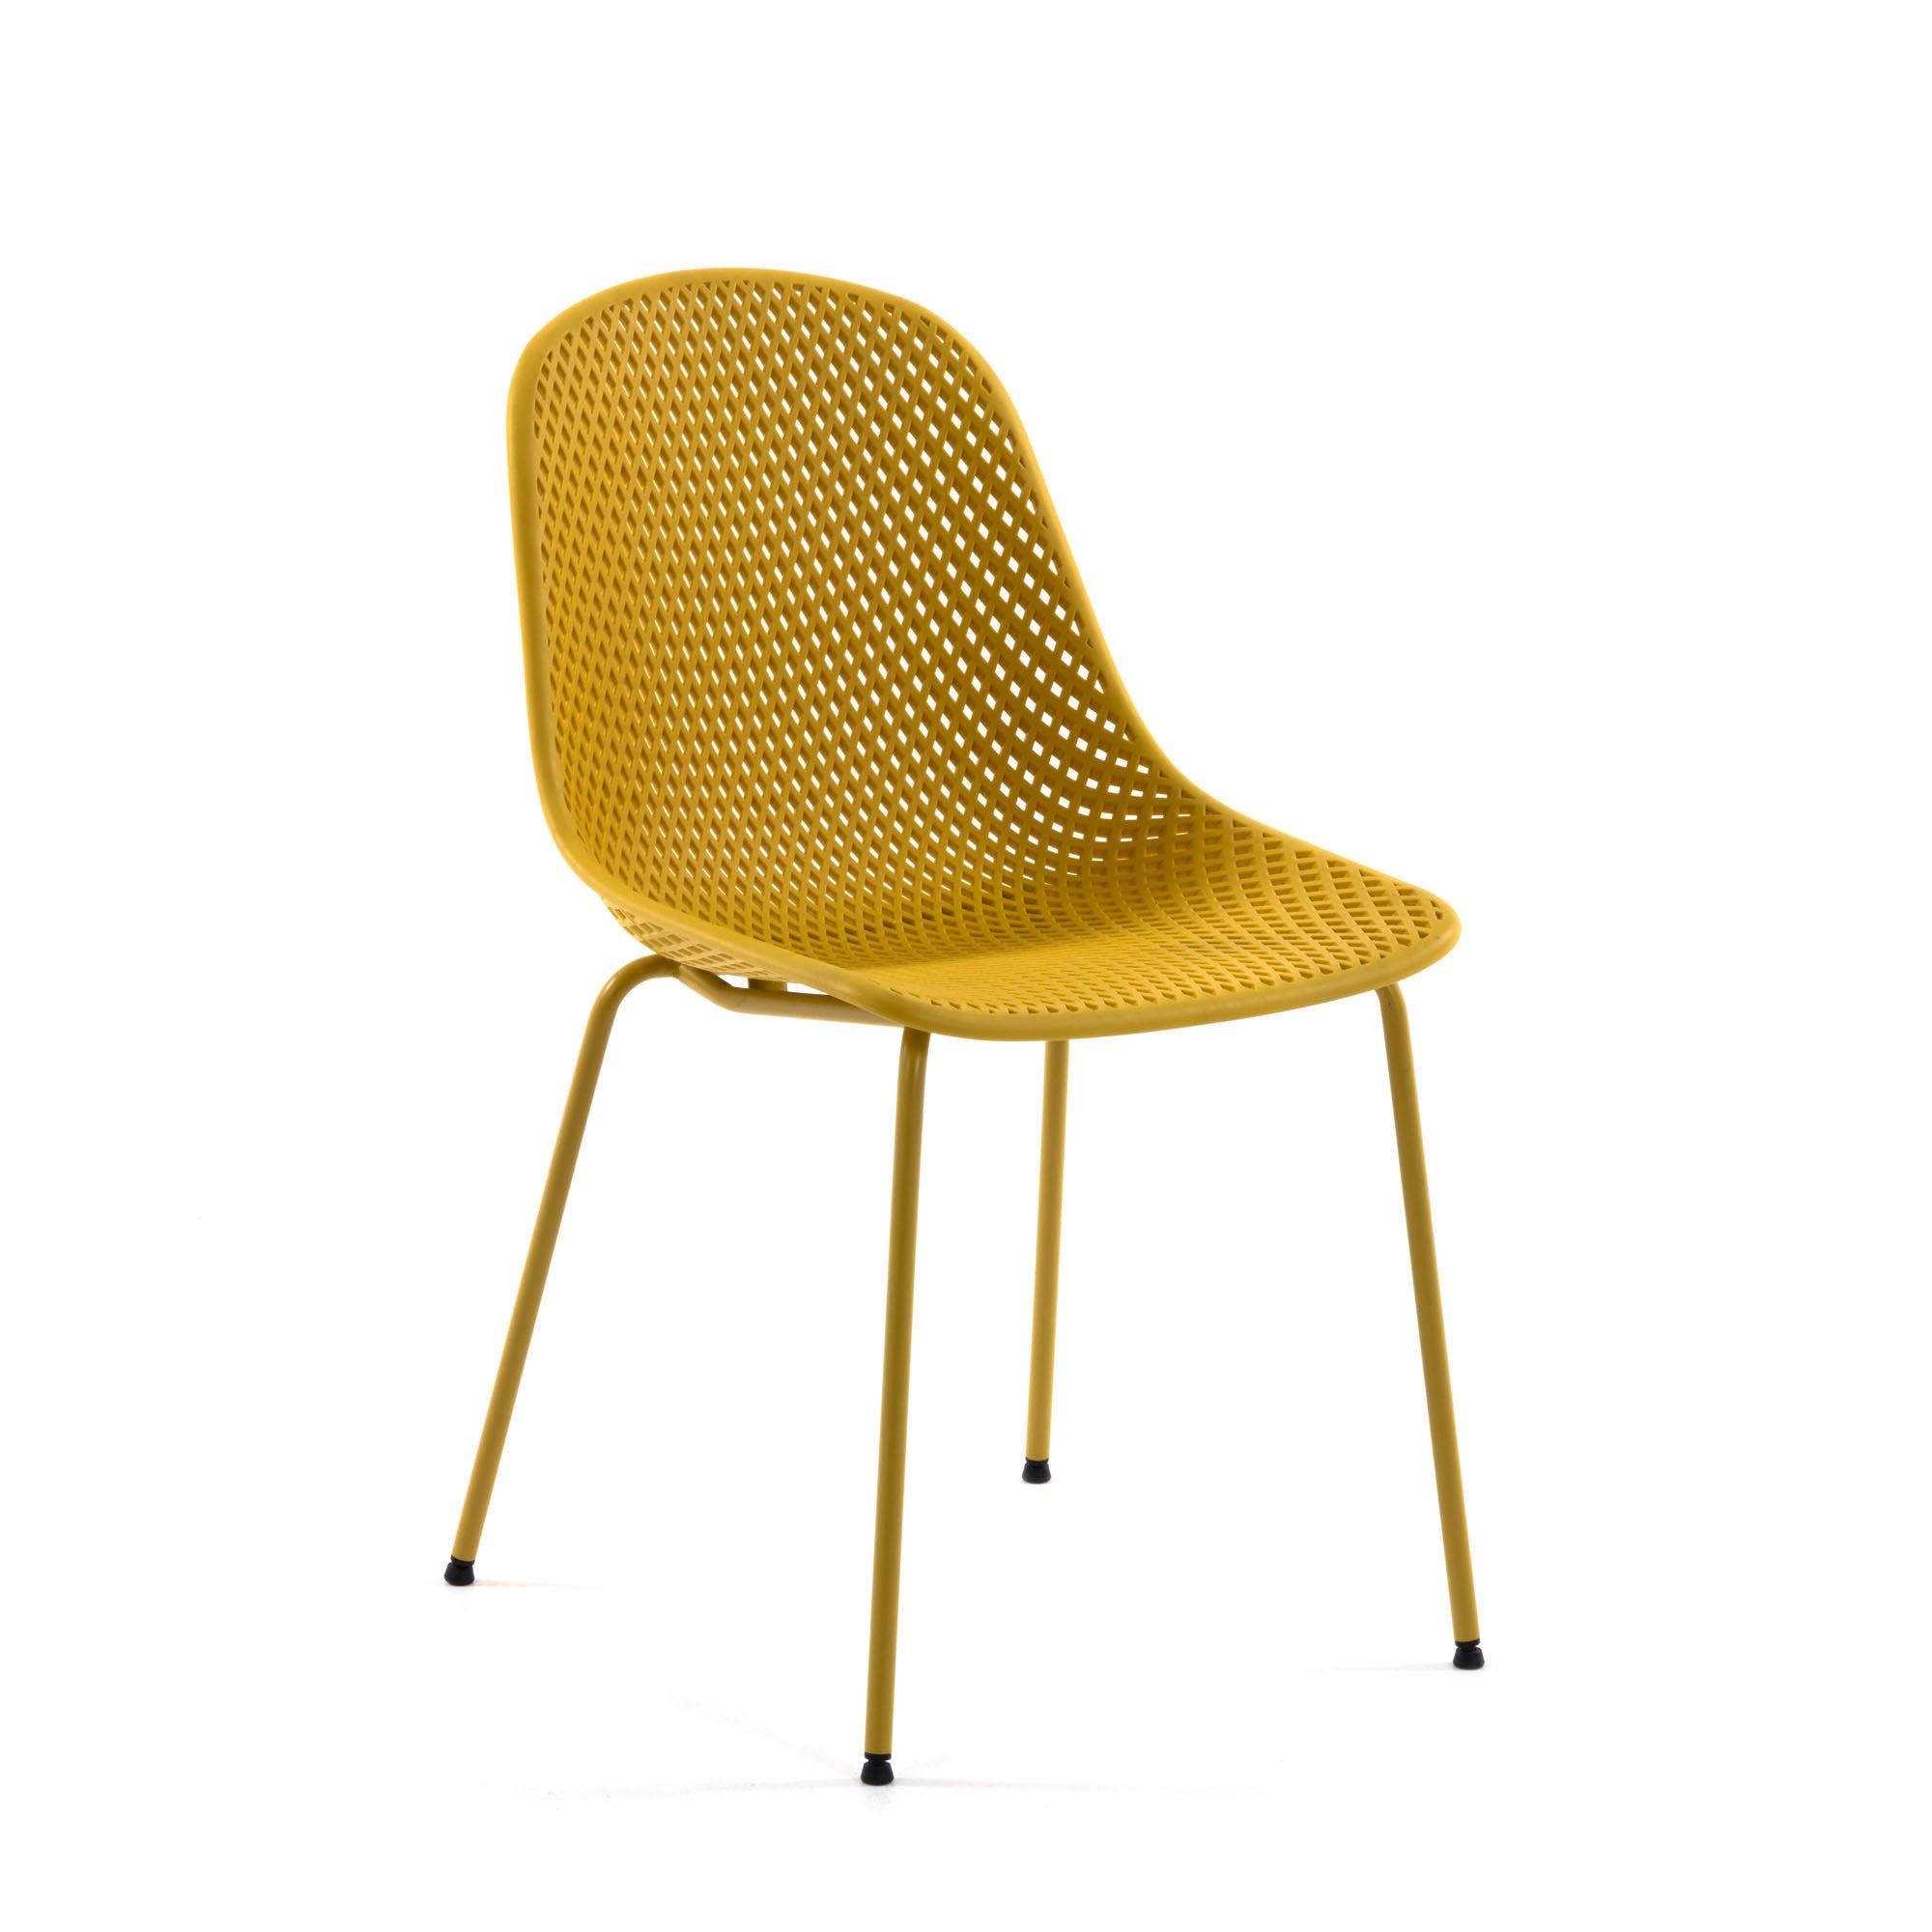 Quinby outdoor dining chair in yellow